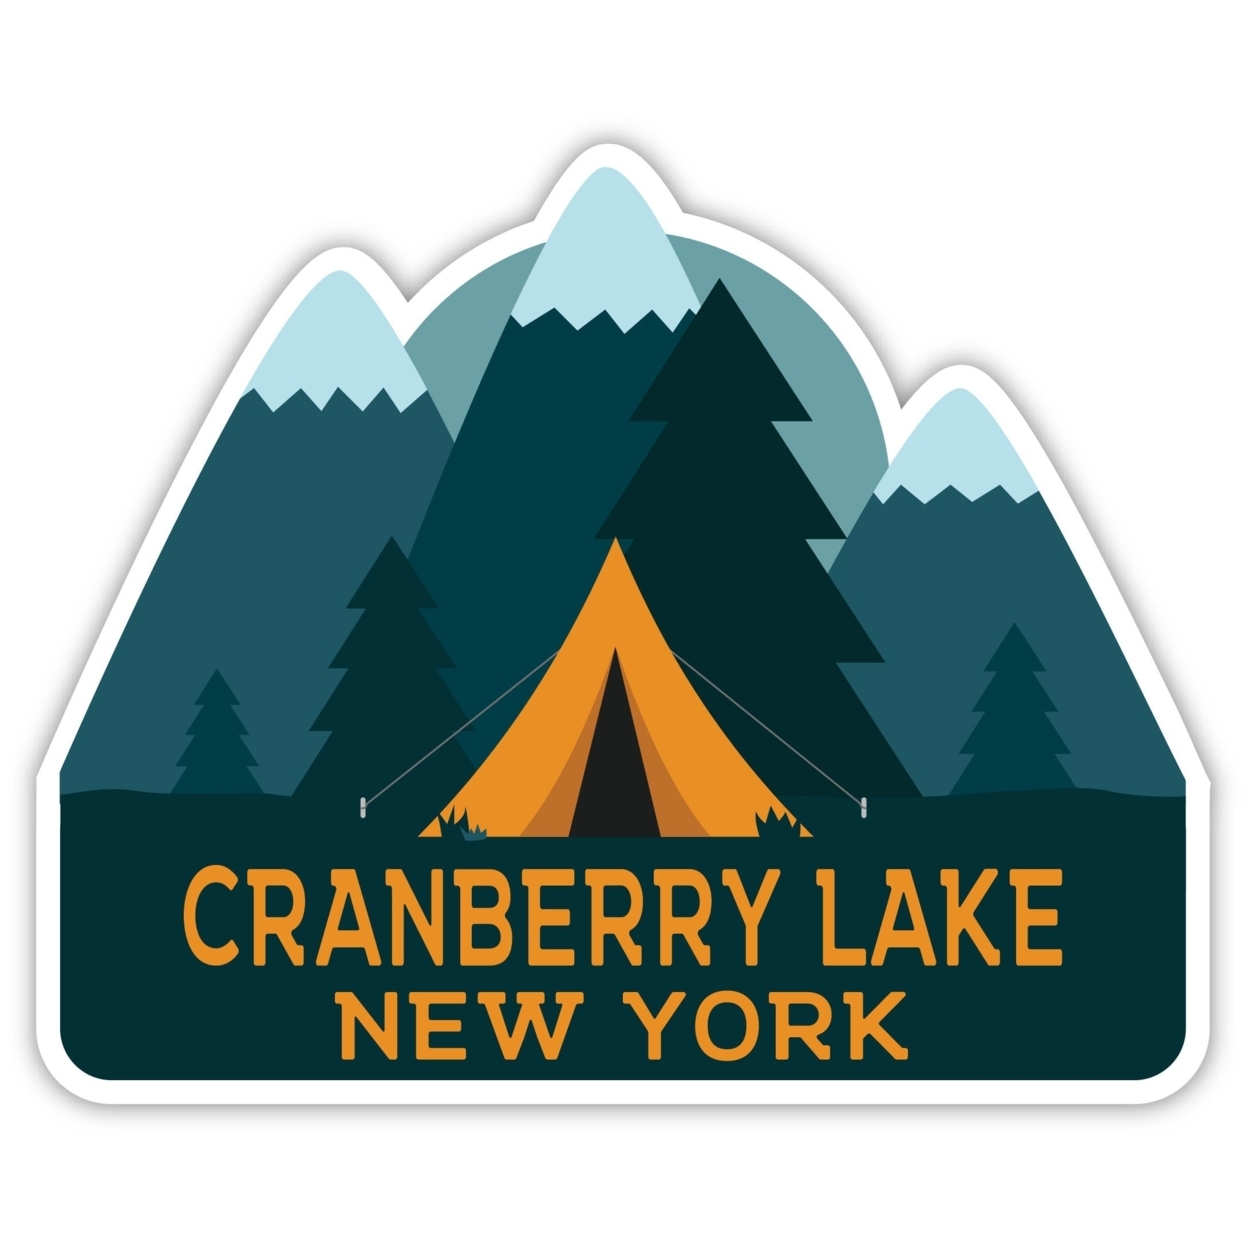 Cranberry Lake New York Souvenir Decorative Stickers (Choose Theme And Size) - 4-Pack, 2-Inch, Adventures Awaits